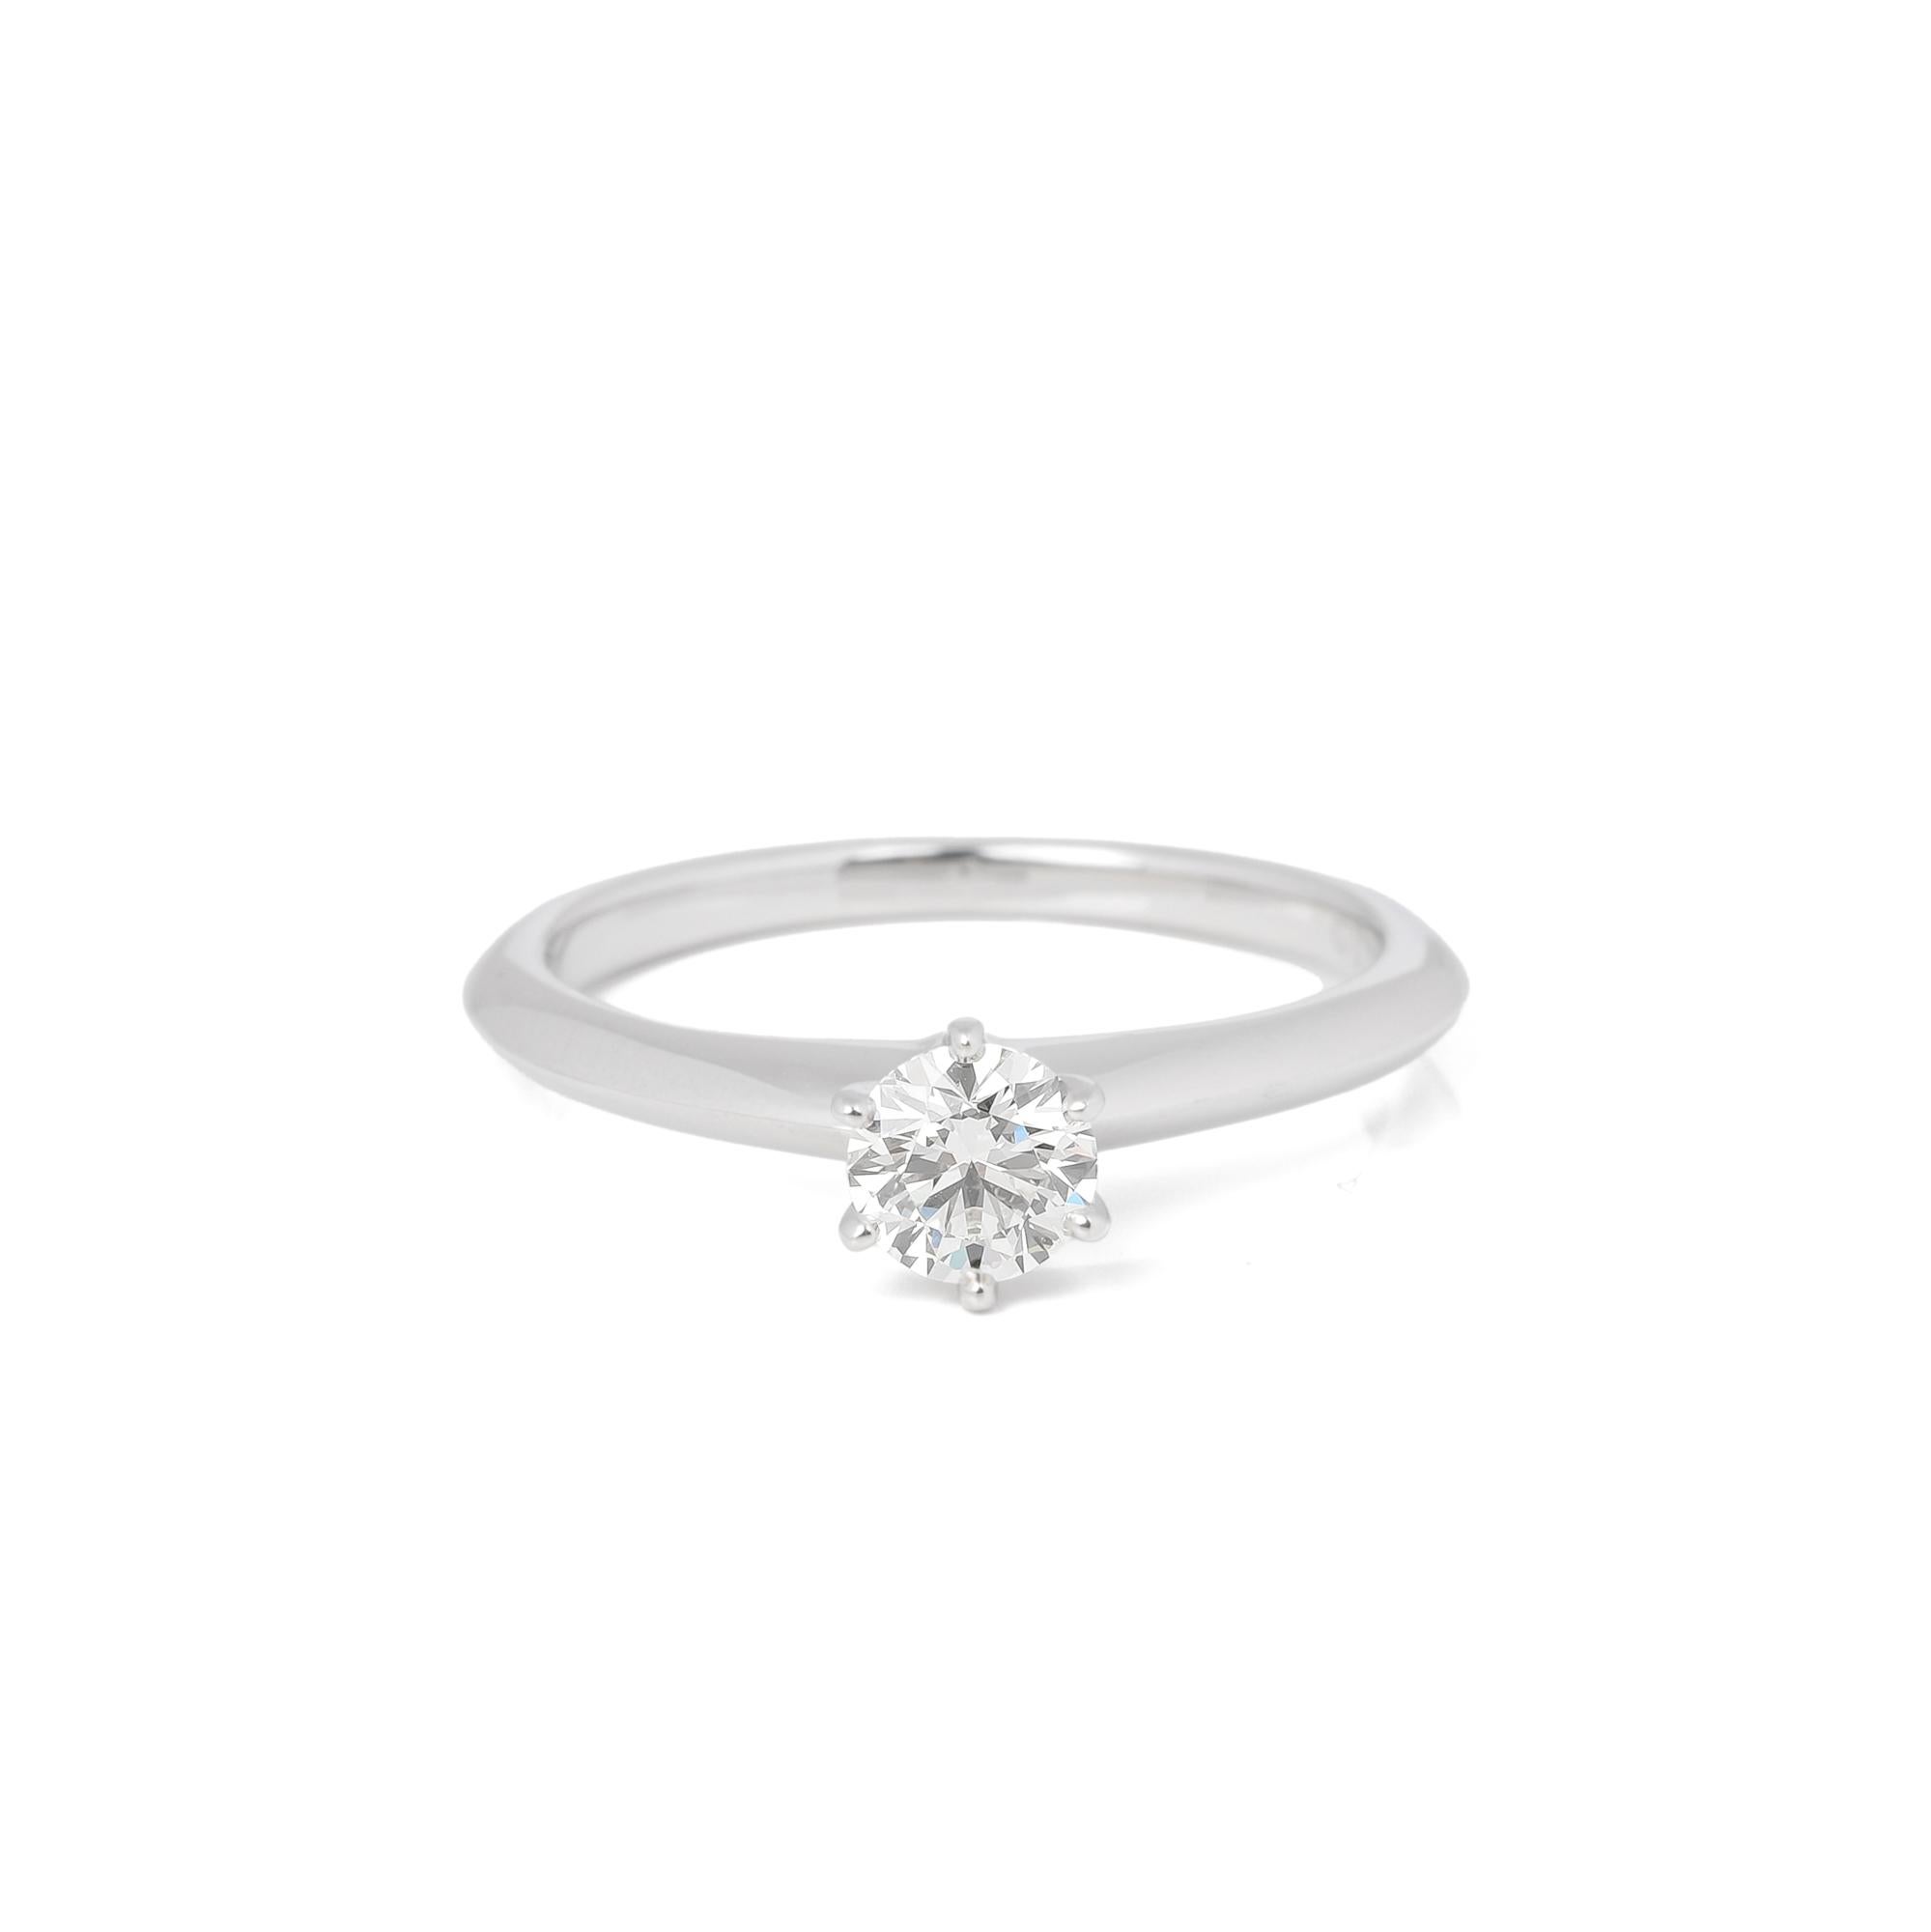 Tiffany & Co Setting 0.35 Carat Diamond Solitaire Ring For Sale 2